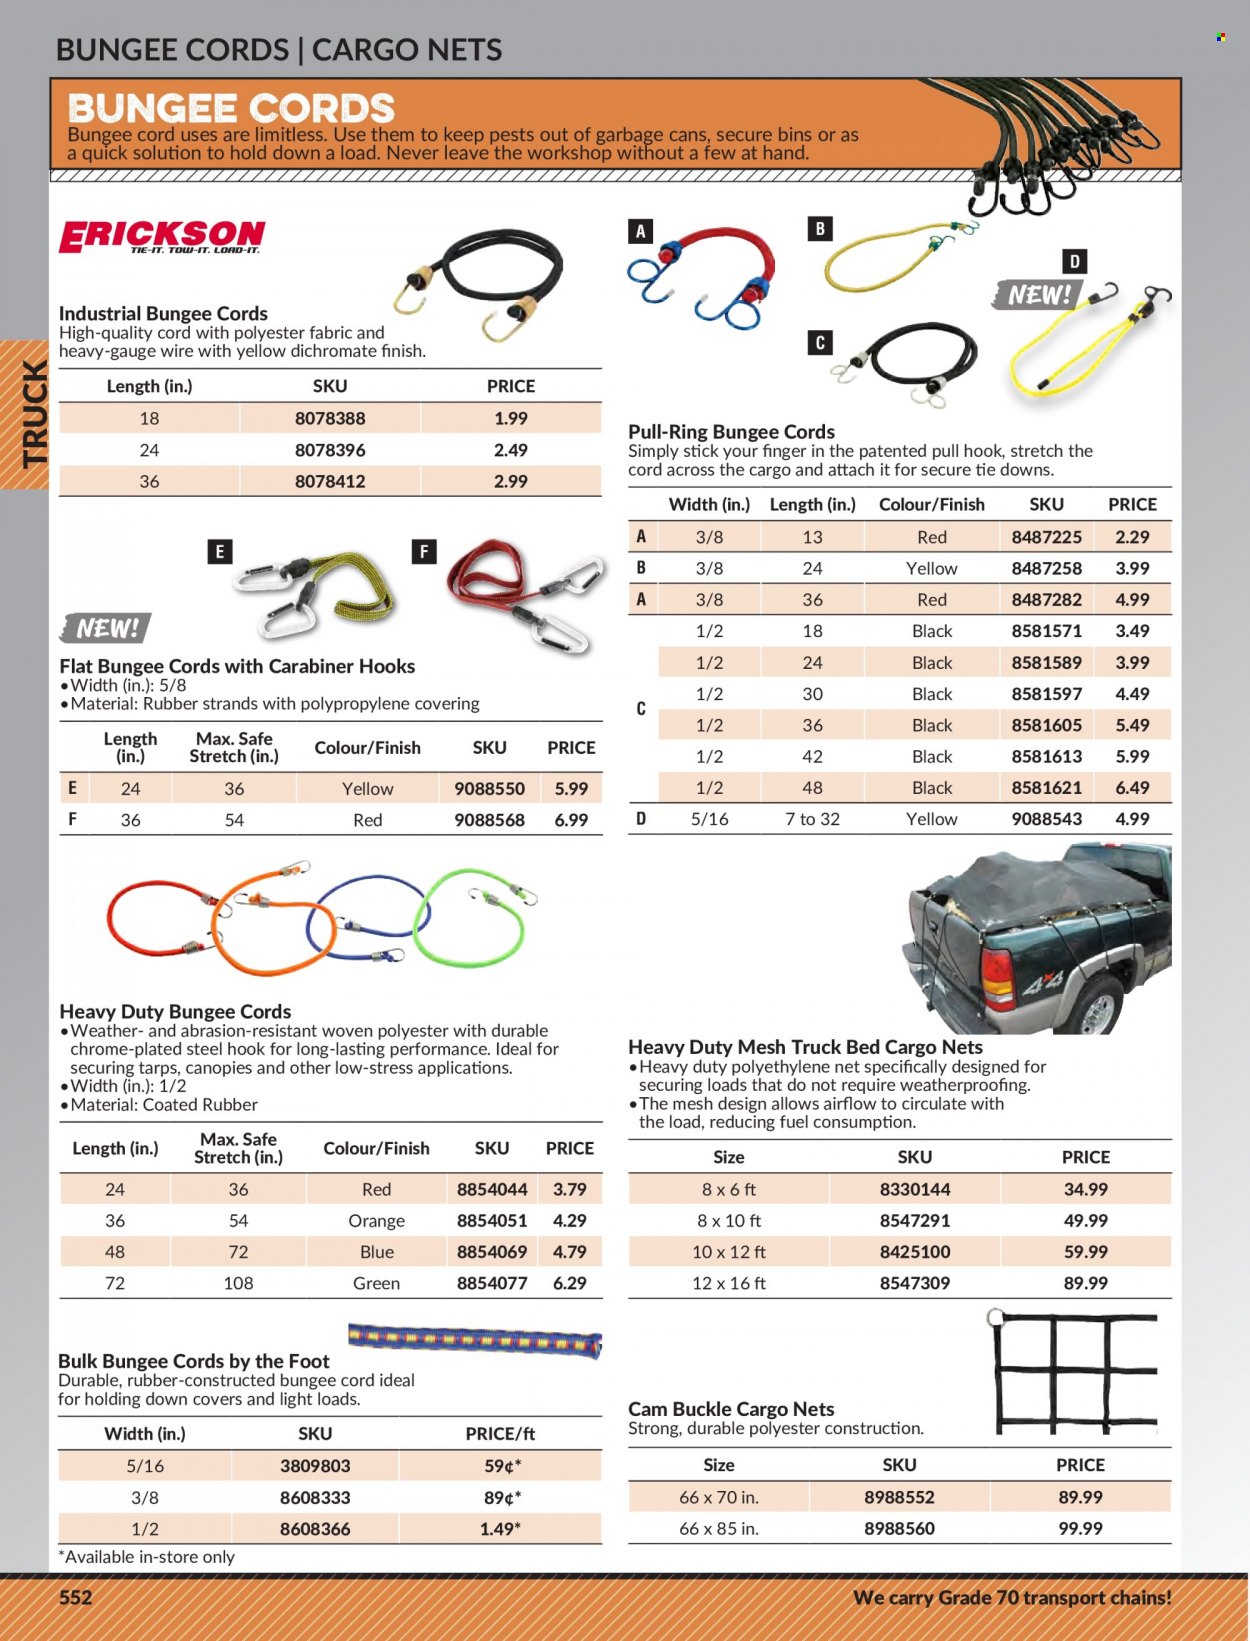 Princess Auto Flyer - Sales products - bungee cords, tie downs. Page 562.